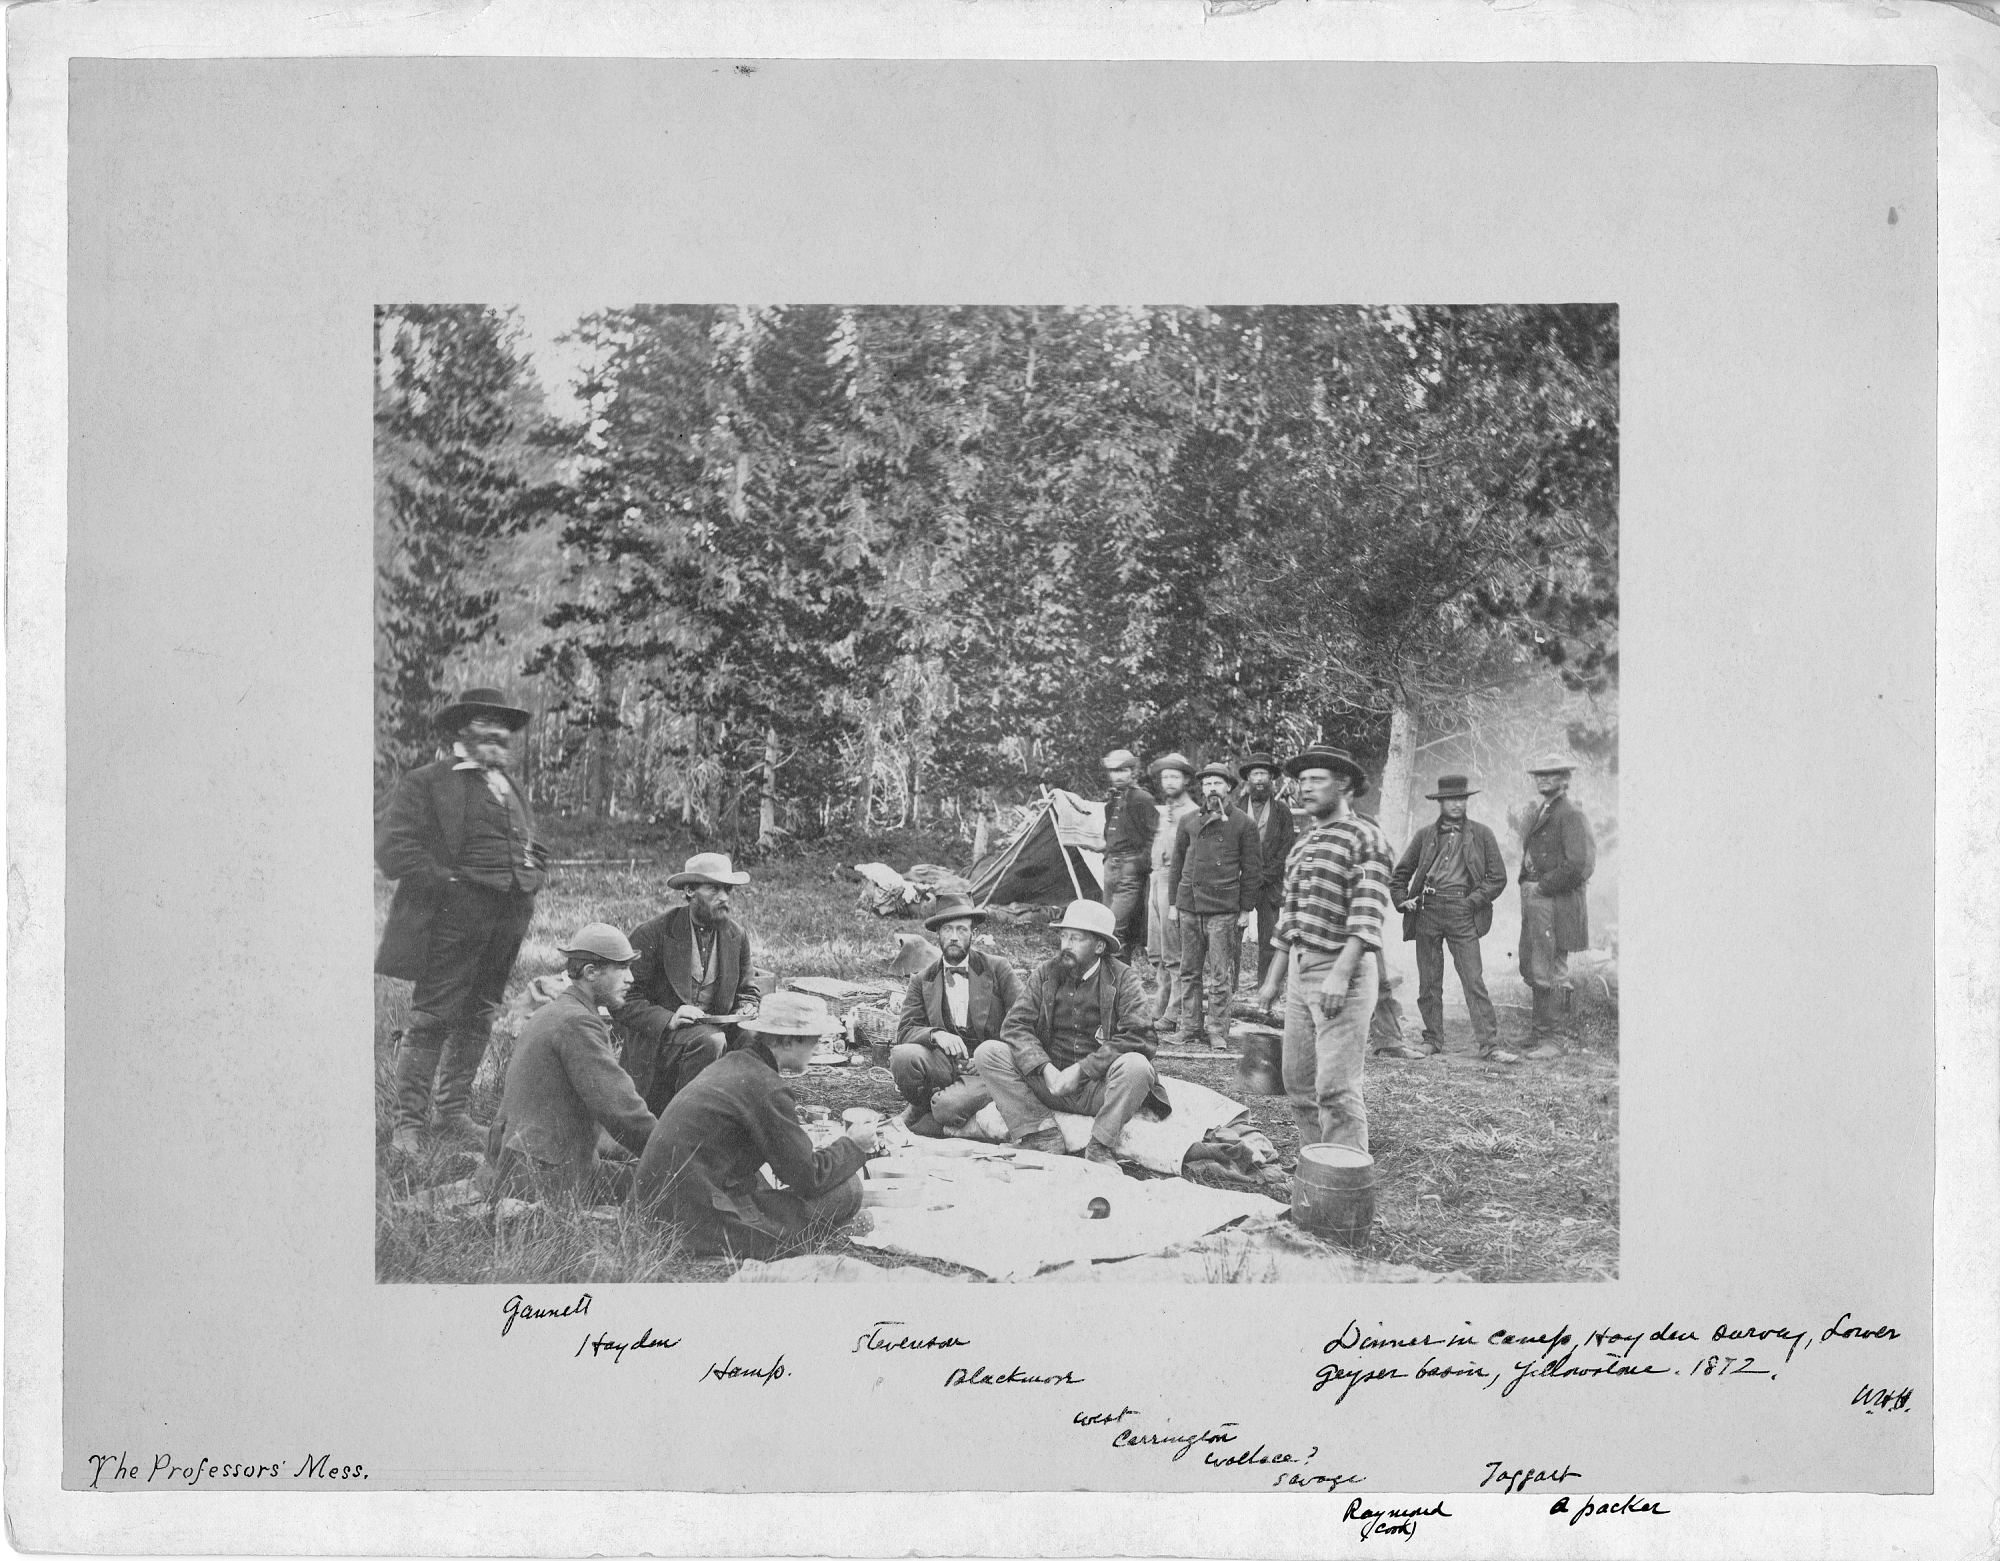 The Haden Survey group at Yellowstone National Park's Lower Geyser Basin, 1872. 